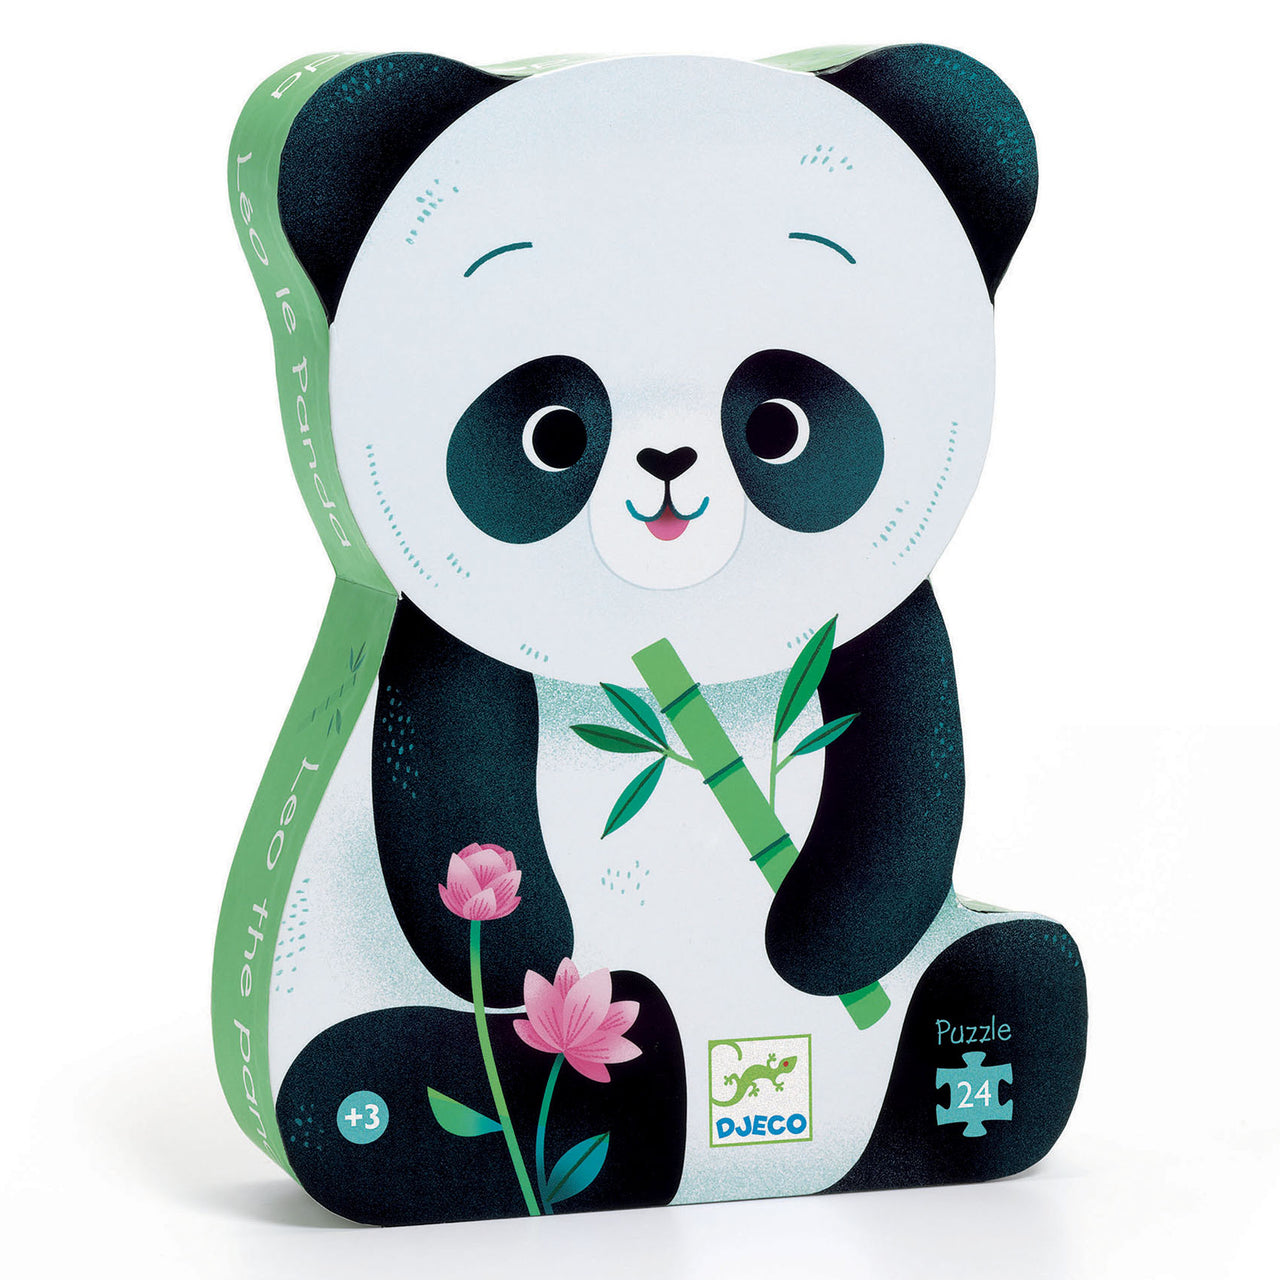 Leo the panda and his mother rest in the shade of the bamboo. A superb 24-piece puzzle in a panda-shaped box.